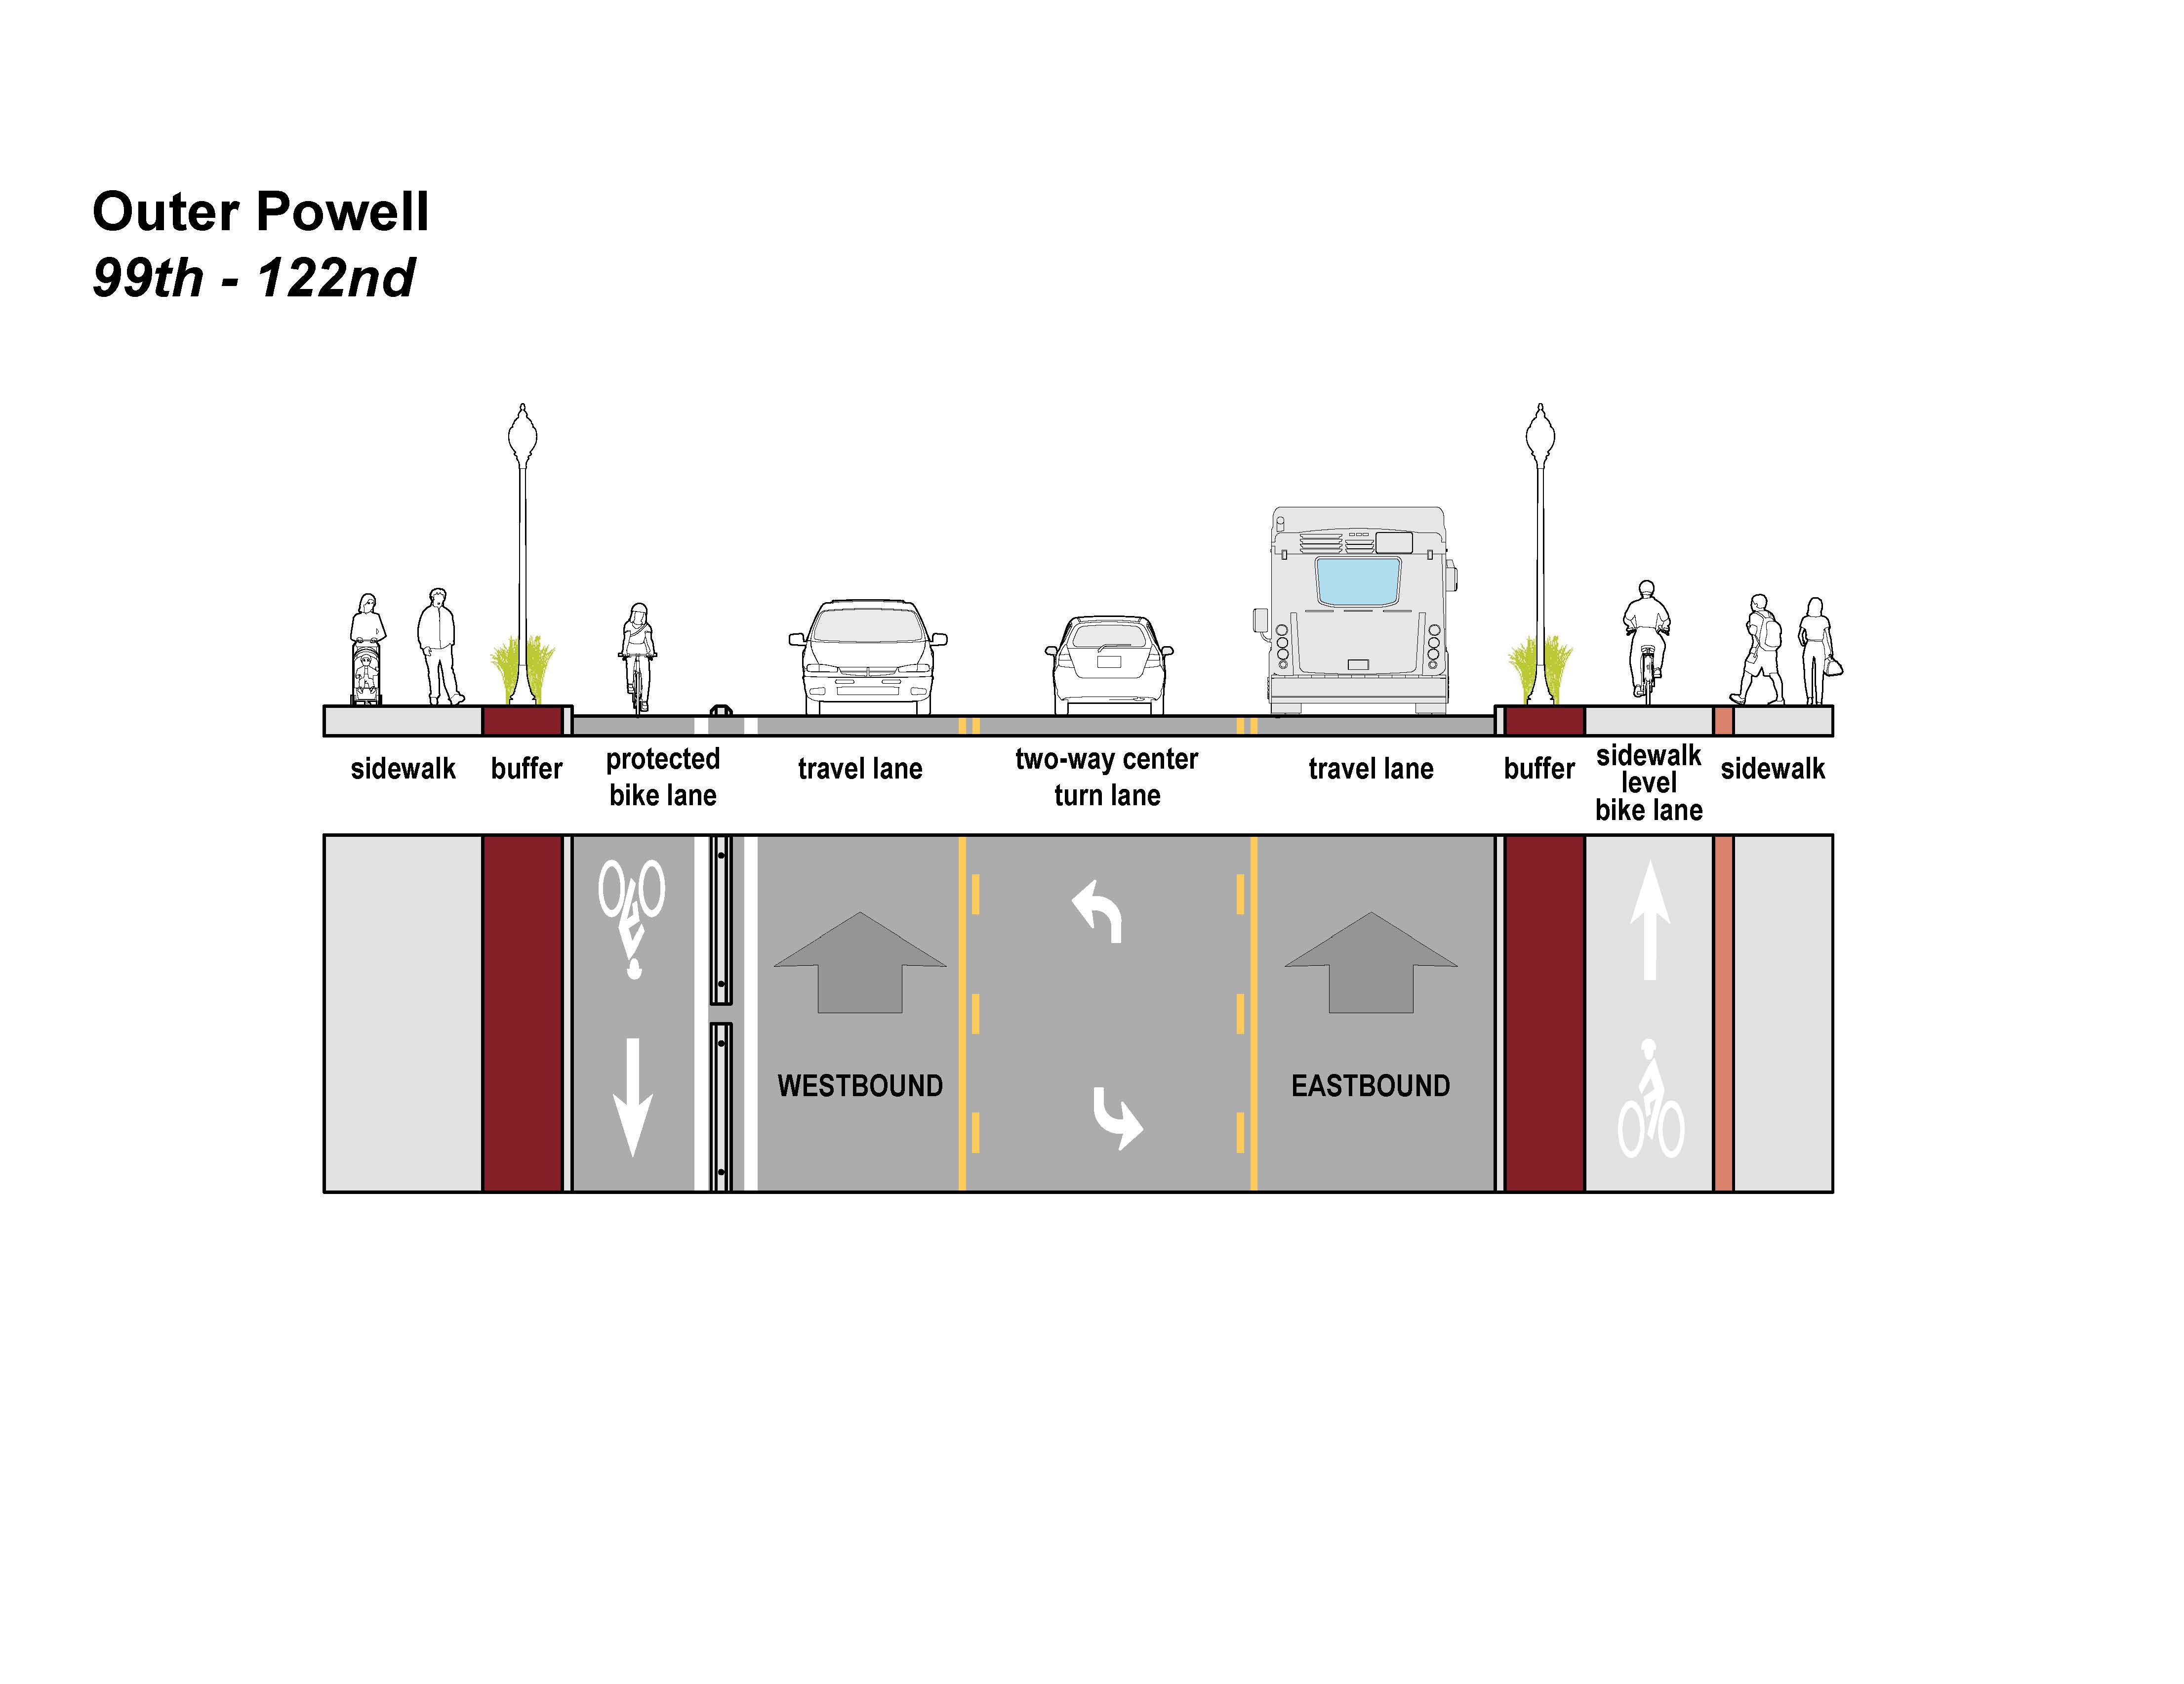 cross-section graphic of SE Powell Boulevard from 99th avenue to 122nd avenue